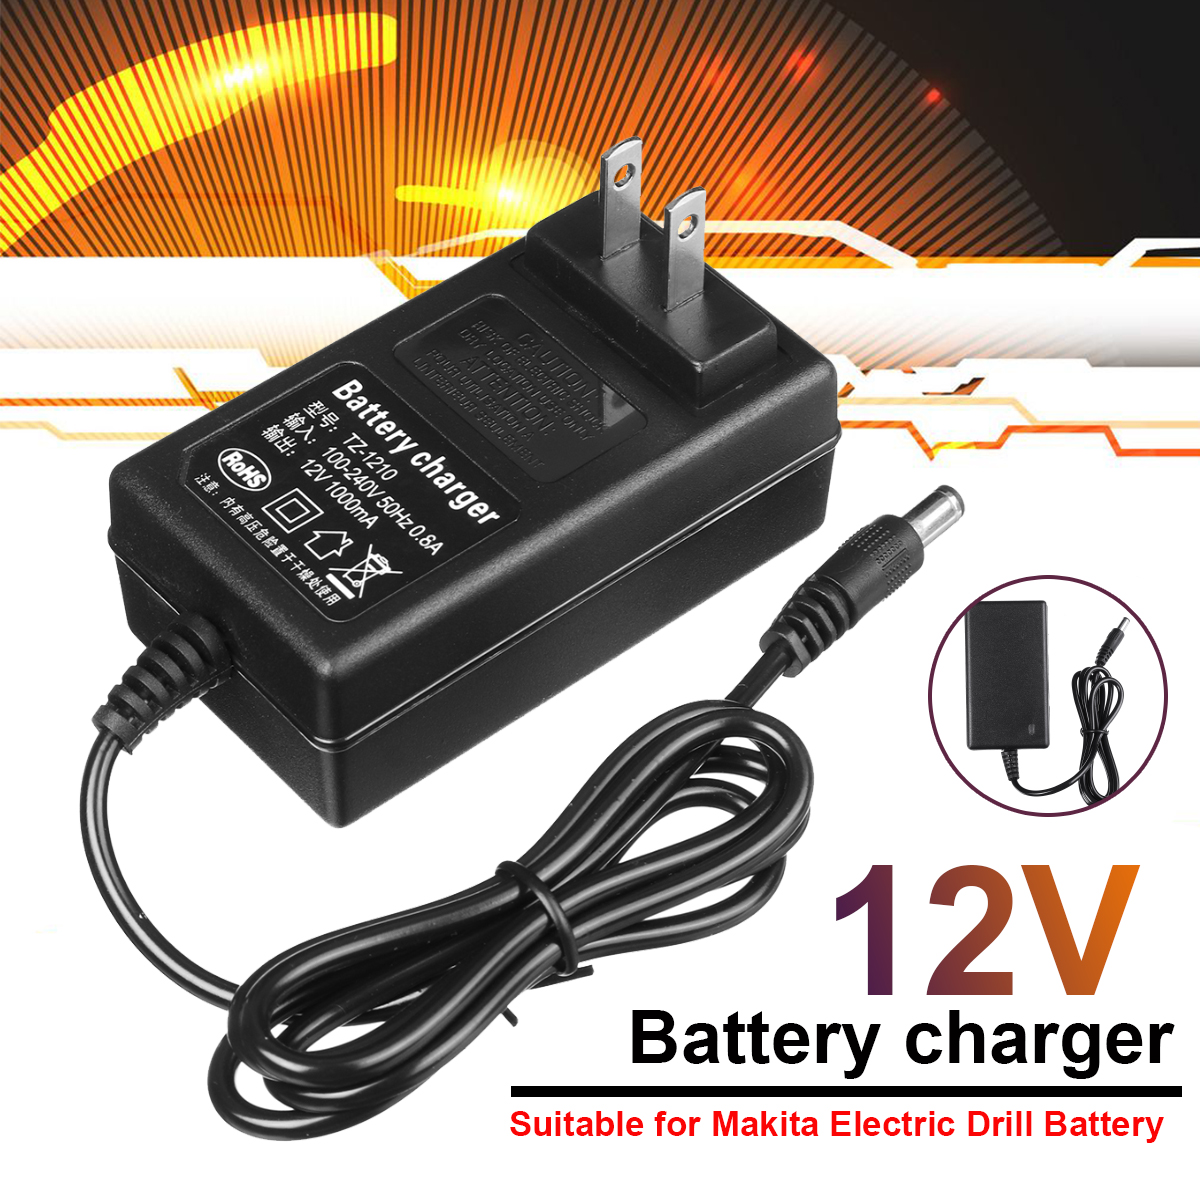 AC-100V-240V-50Hz-06A-Input-12V-1000mAh-Output-Battery-Charger-for-Makita-Electric-Drill-General-Bat-1794719-2